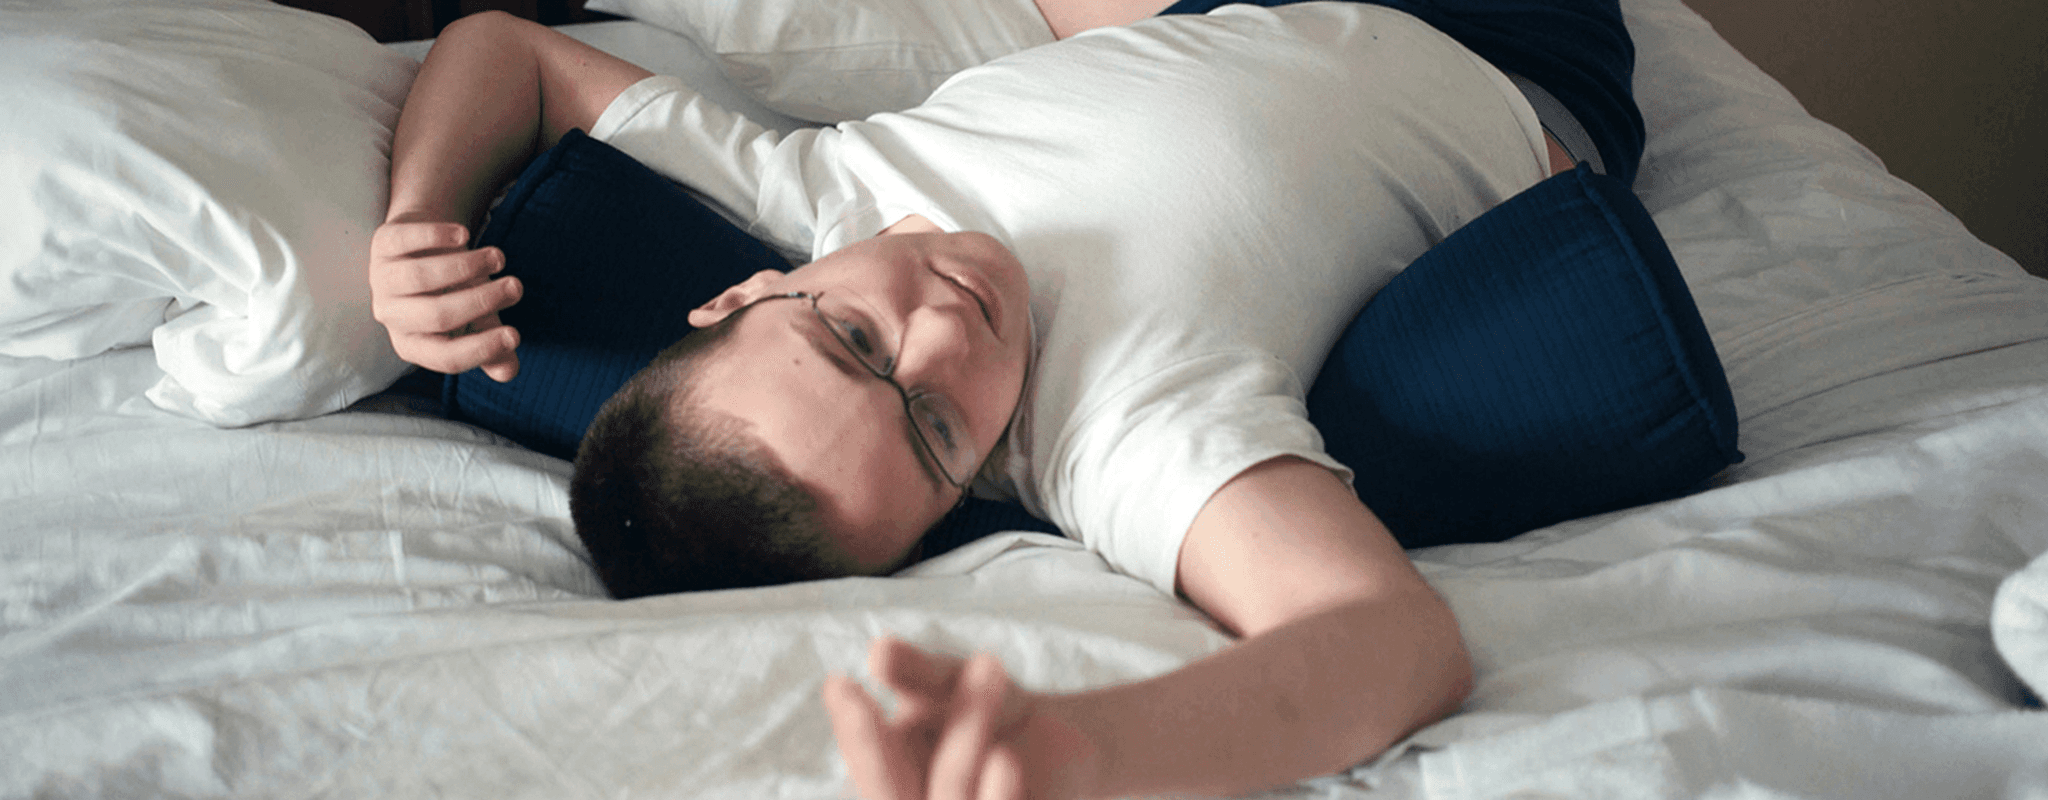 A 19-year-old man who is on the autistic spectrum lies on a bed playing with a piece of string